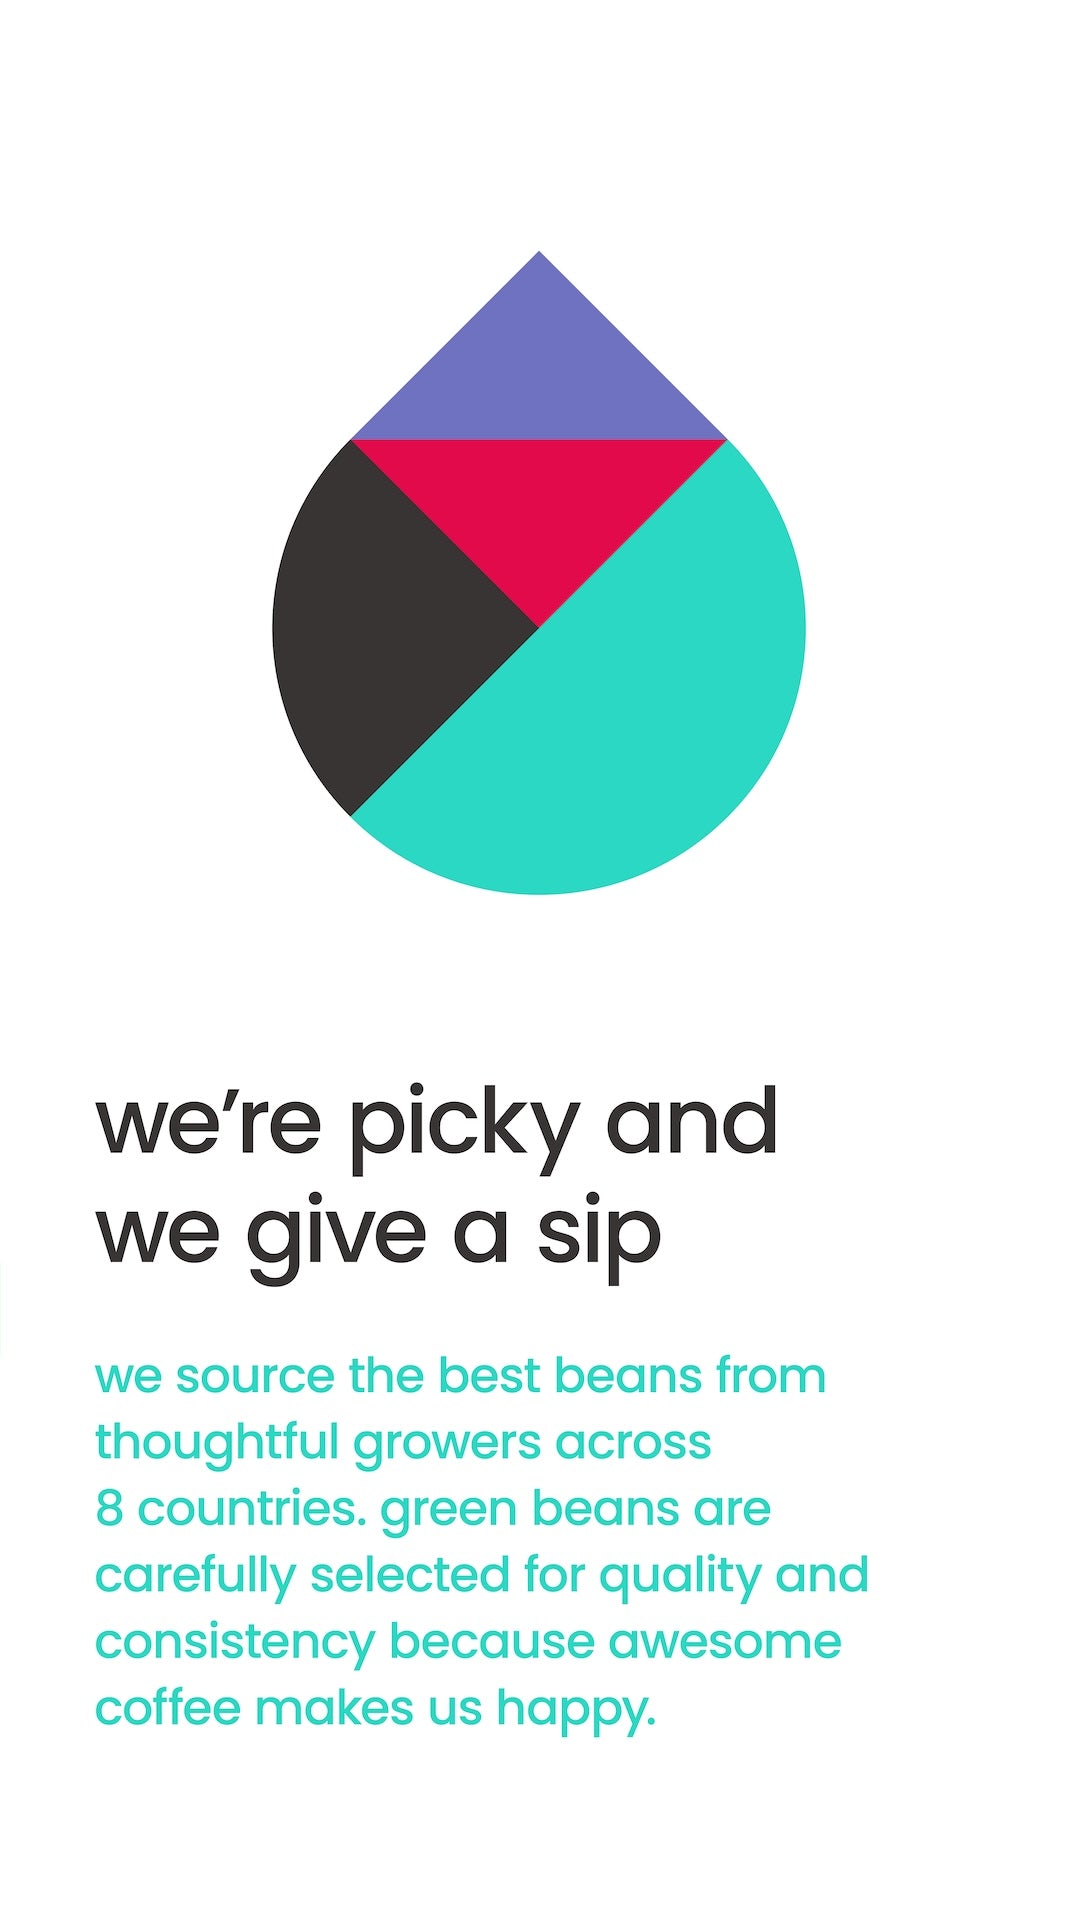 we're picky and we give a sip. we source the best beans from thoughtful growers across 8 countries. green beans are carefully selected for quality and consistency because awesome coffee makes us happy.